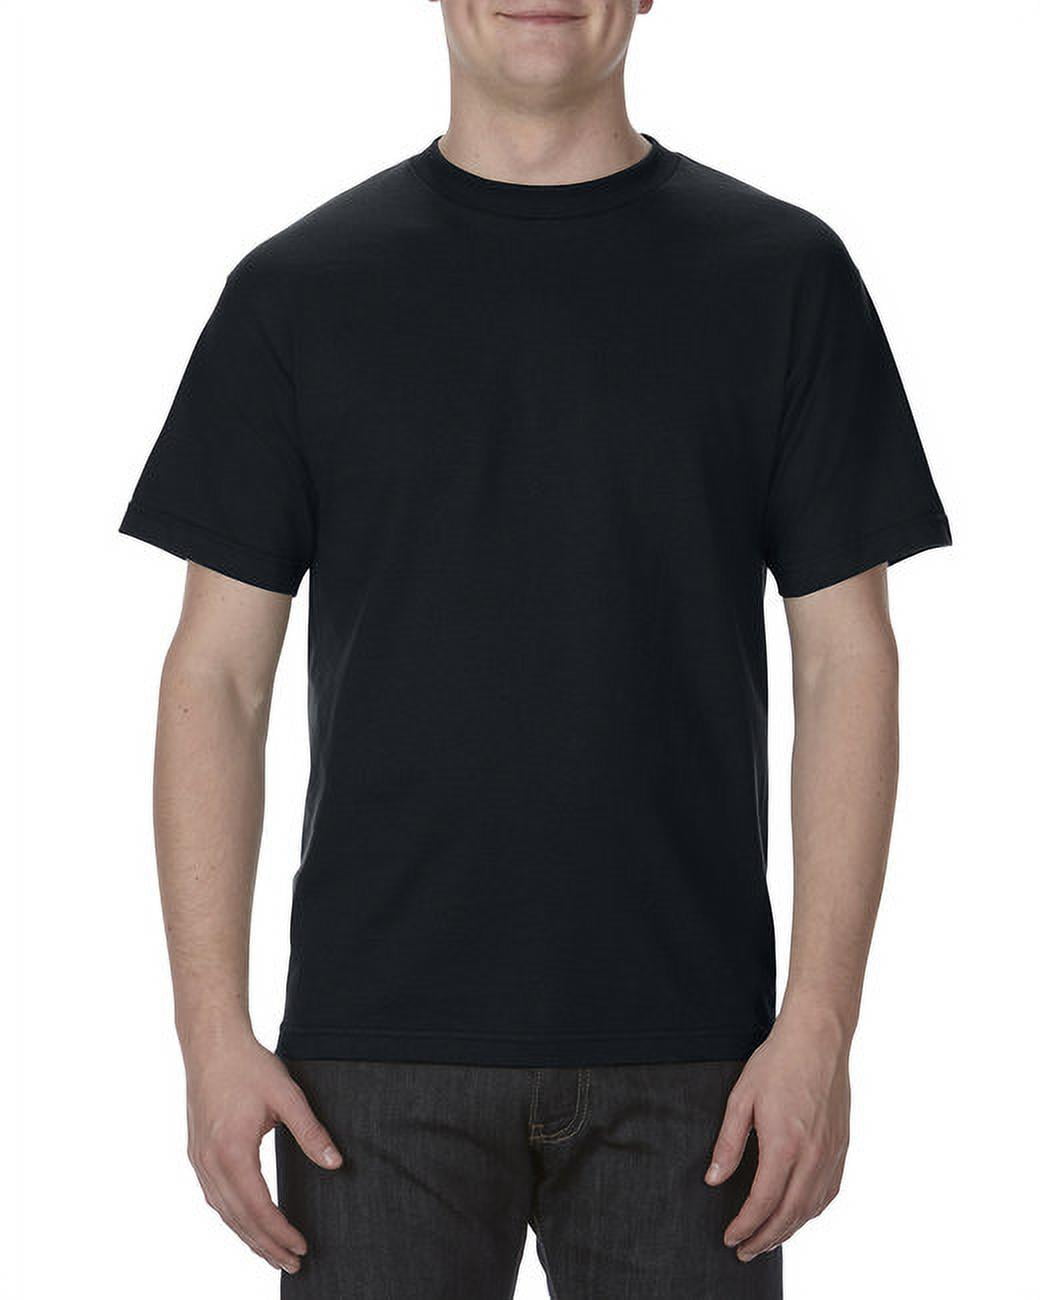 ALSTYLE Classic T-Shirt 1301 Charcoal Heather 3XL 